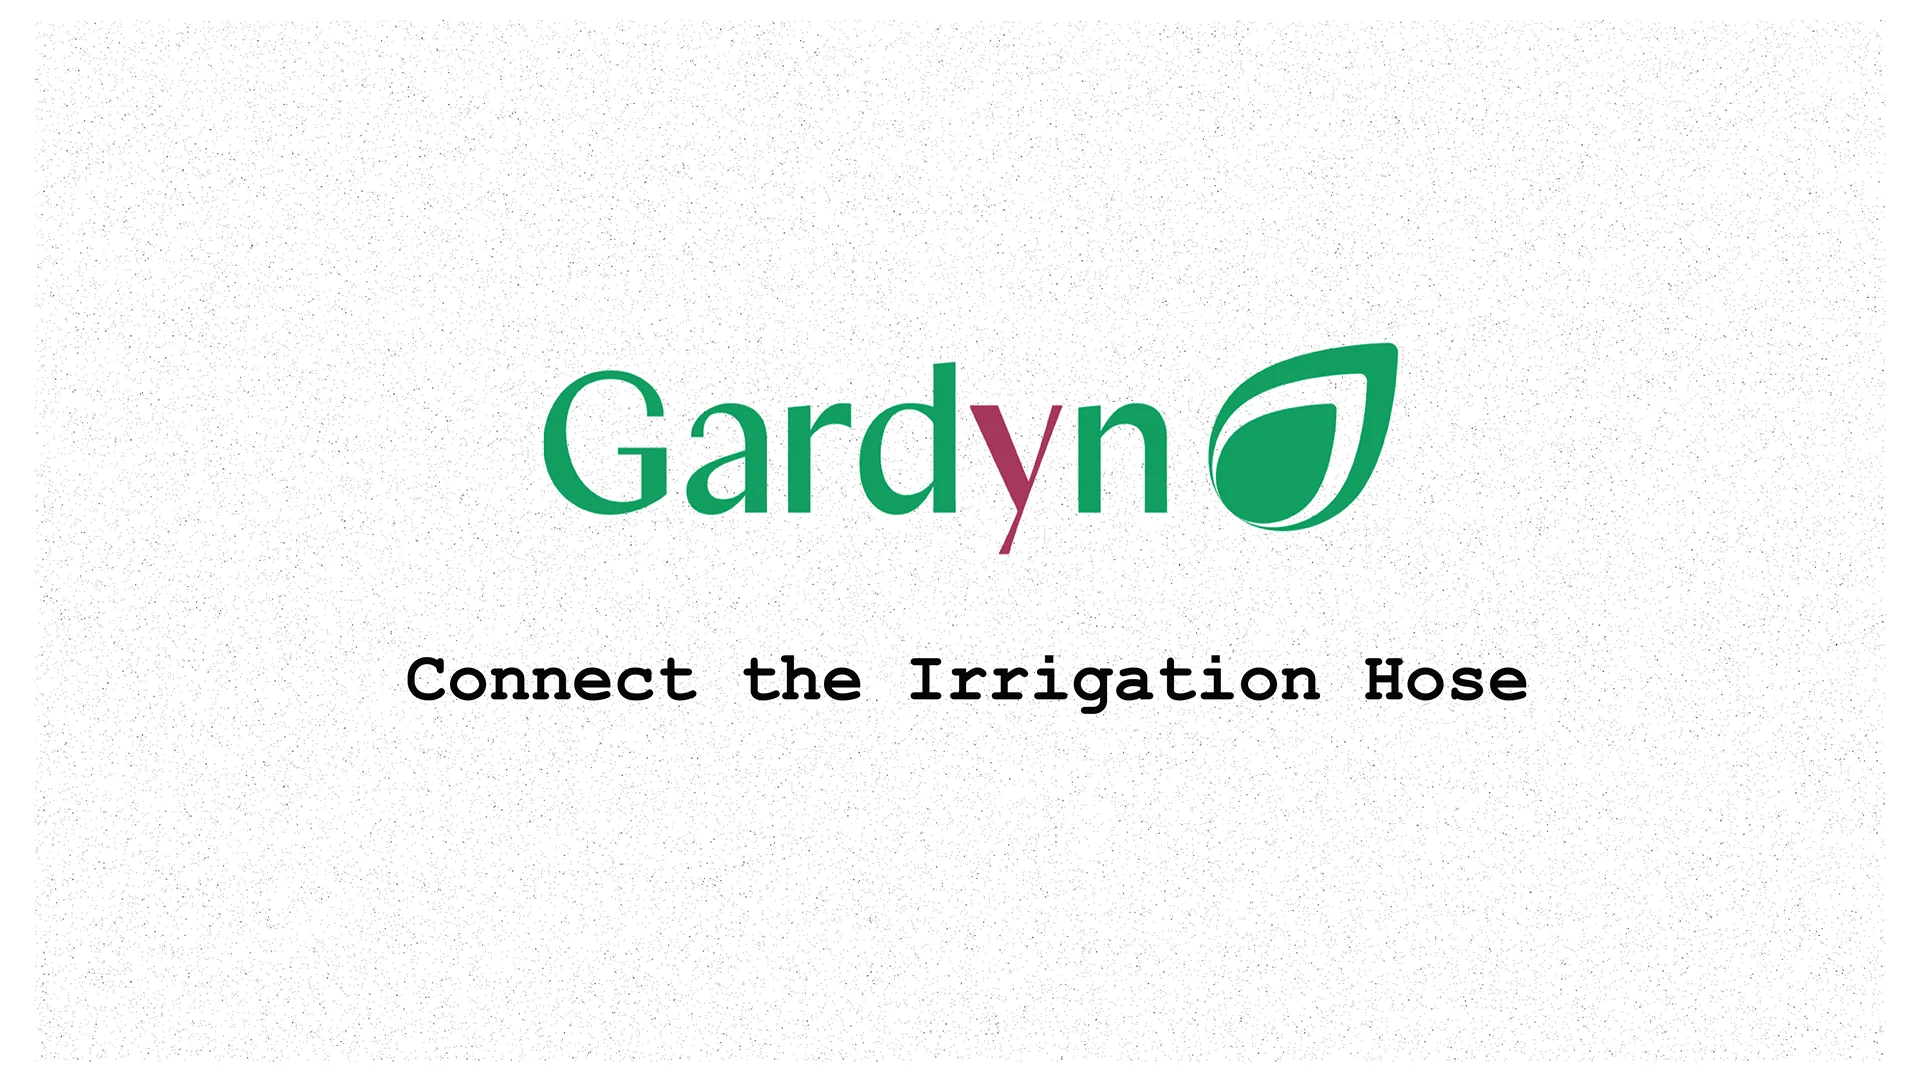 Connect the Irrigation Hose on Vimeo